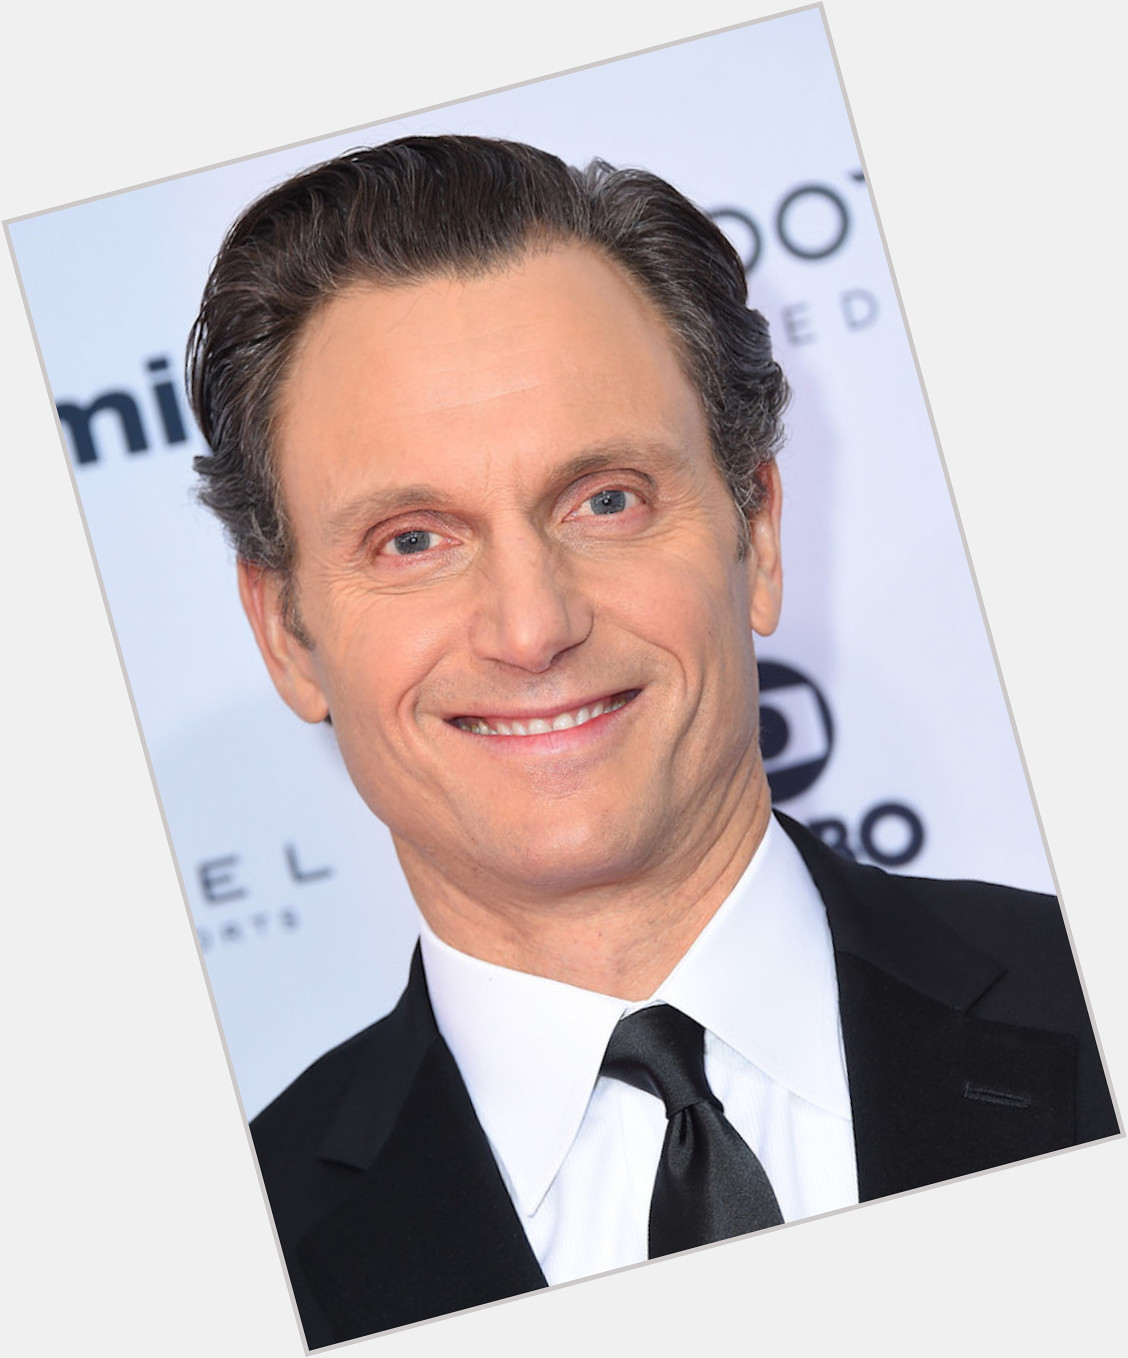 Happy Birthday, Tony Goldwyn
For Disney, he voiced in the 1999 animated feature film of the same name. 